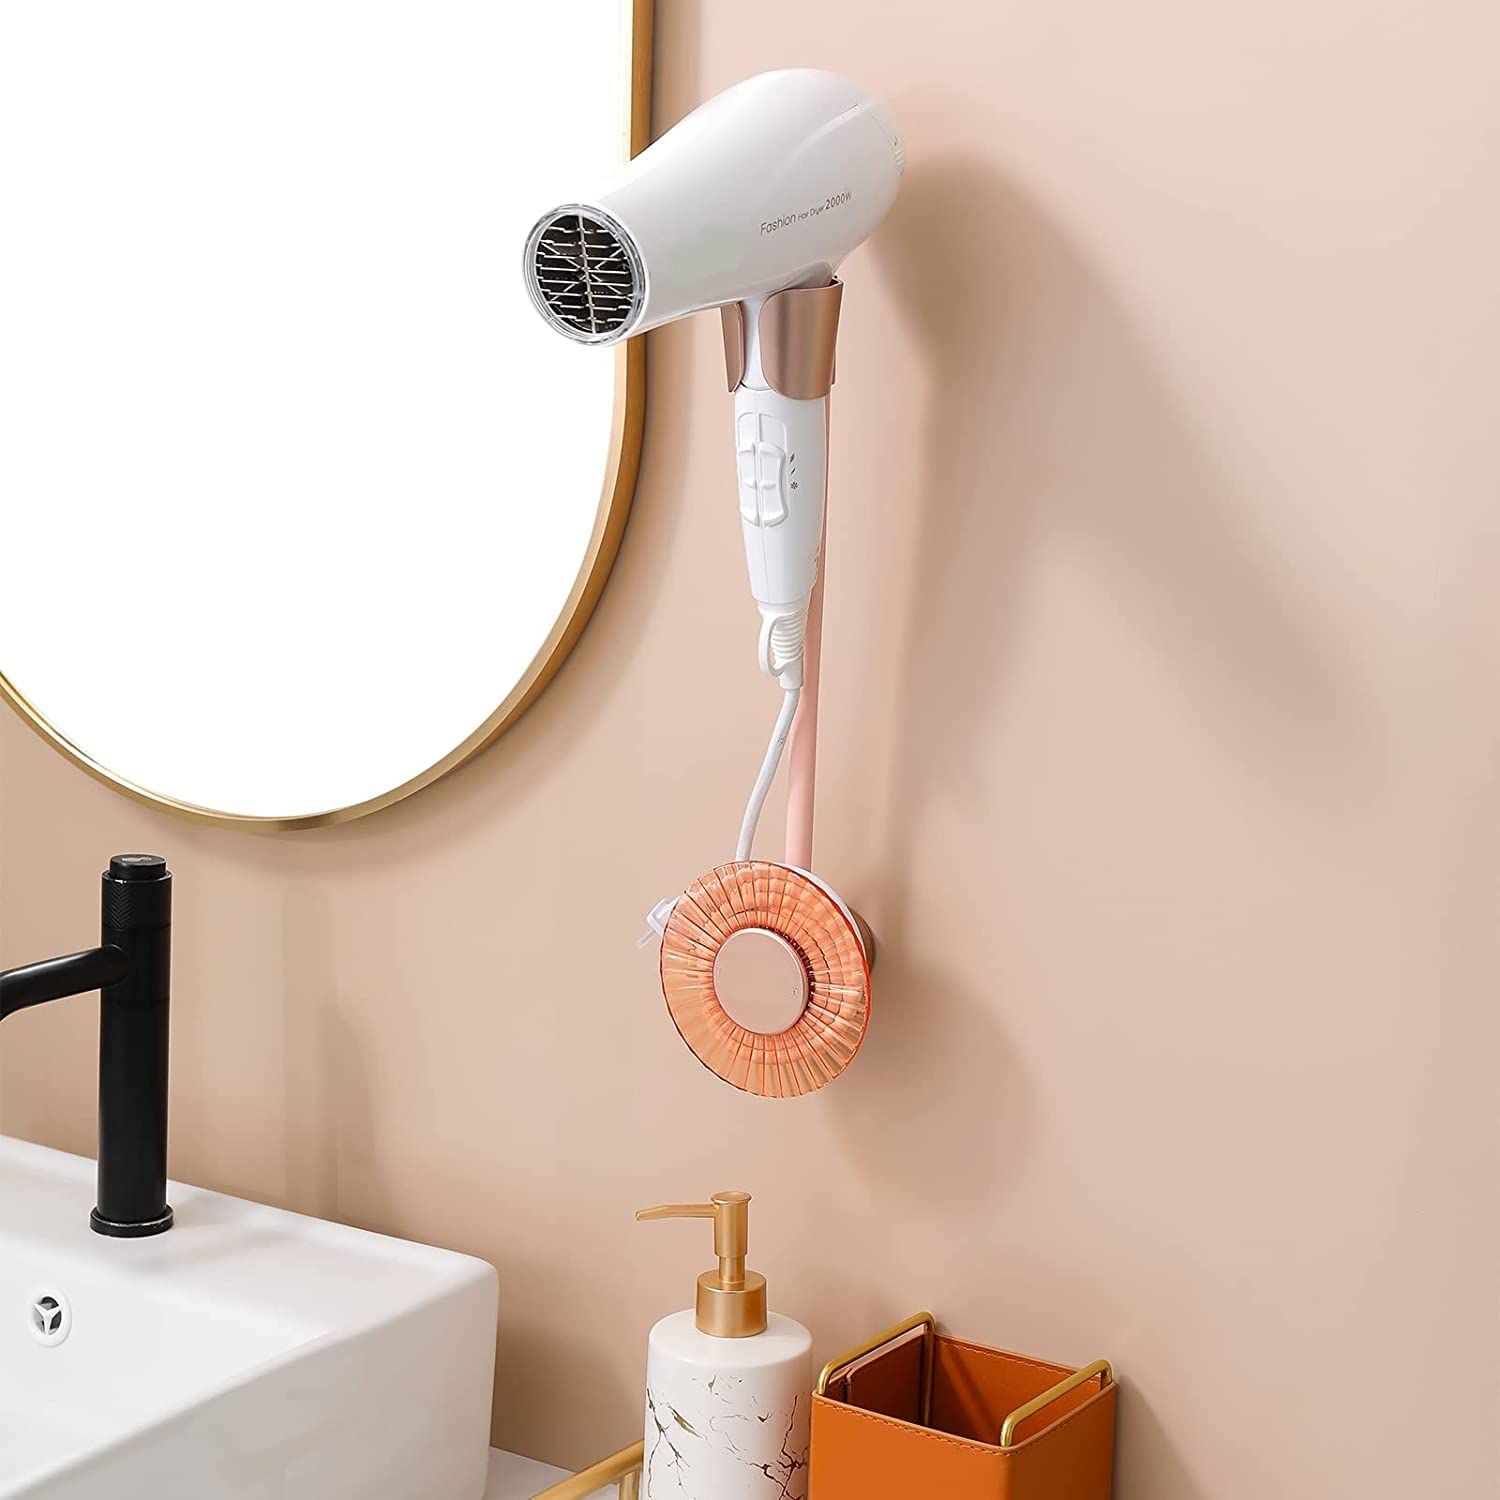 🔥LAST DAY SALE 50% OFF🔥Hair Dryer Holder Wall Mounted - BUY 2 FREE SHIPPING